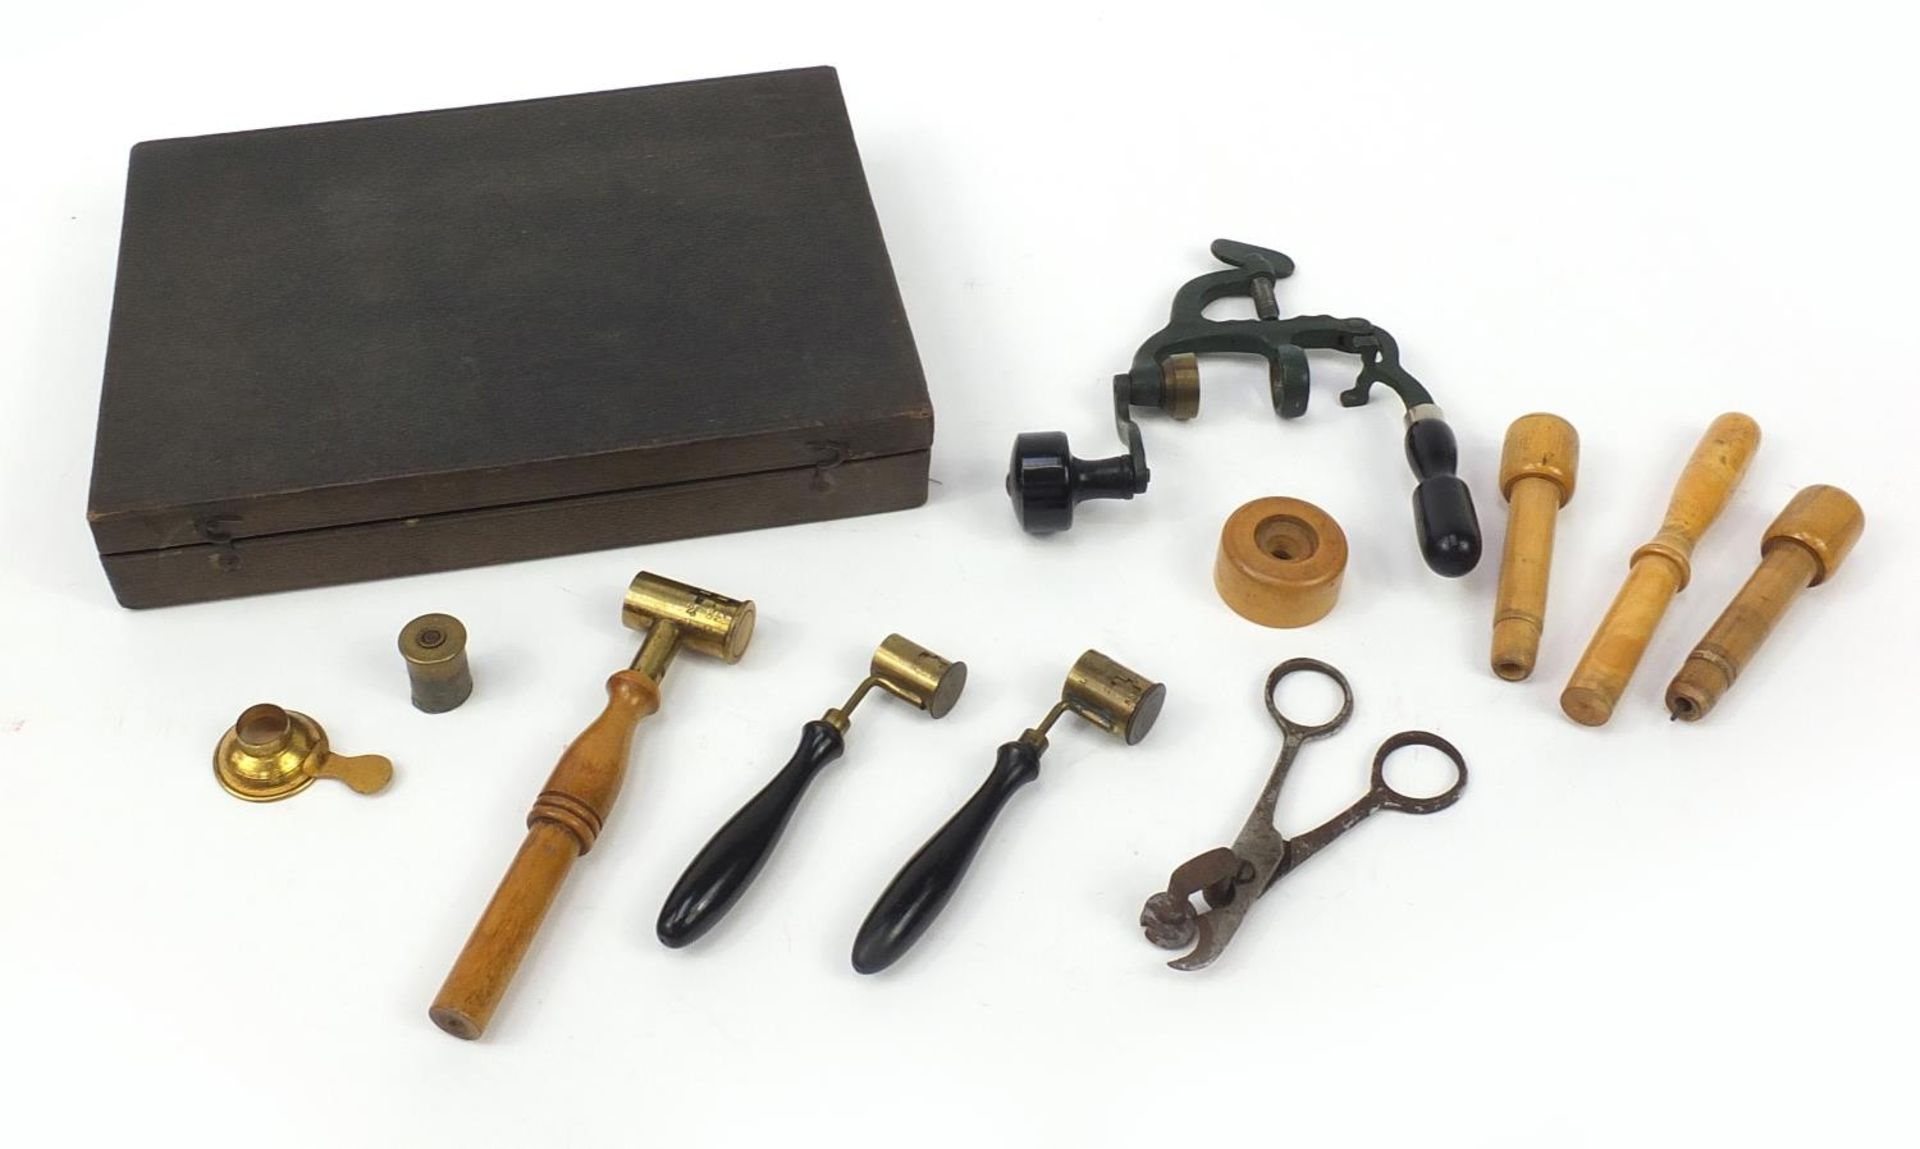 Antique gun ammunition making equipment including a cartridge maker, clamps and scissors housed in a